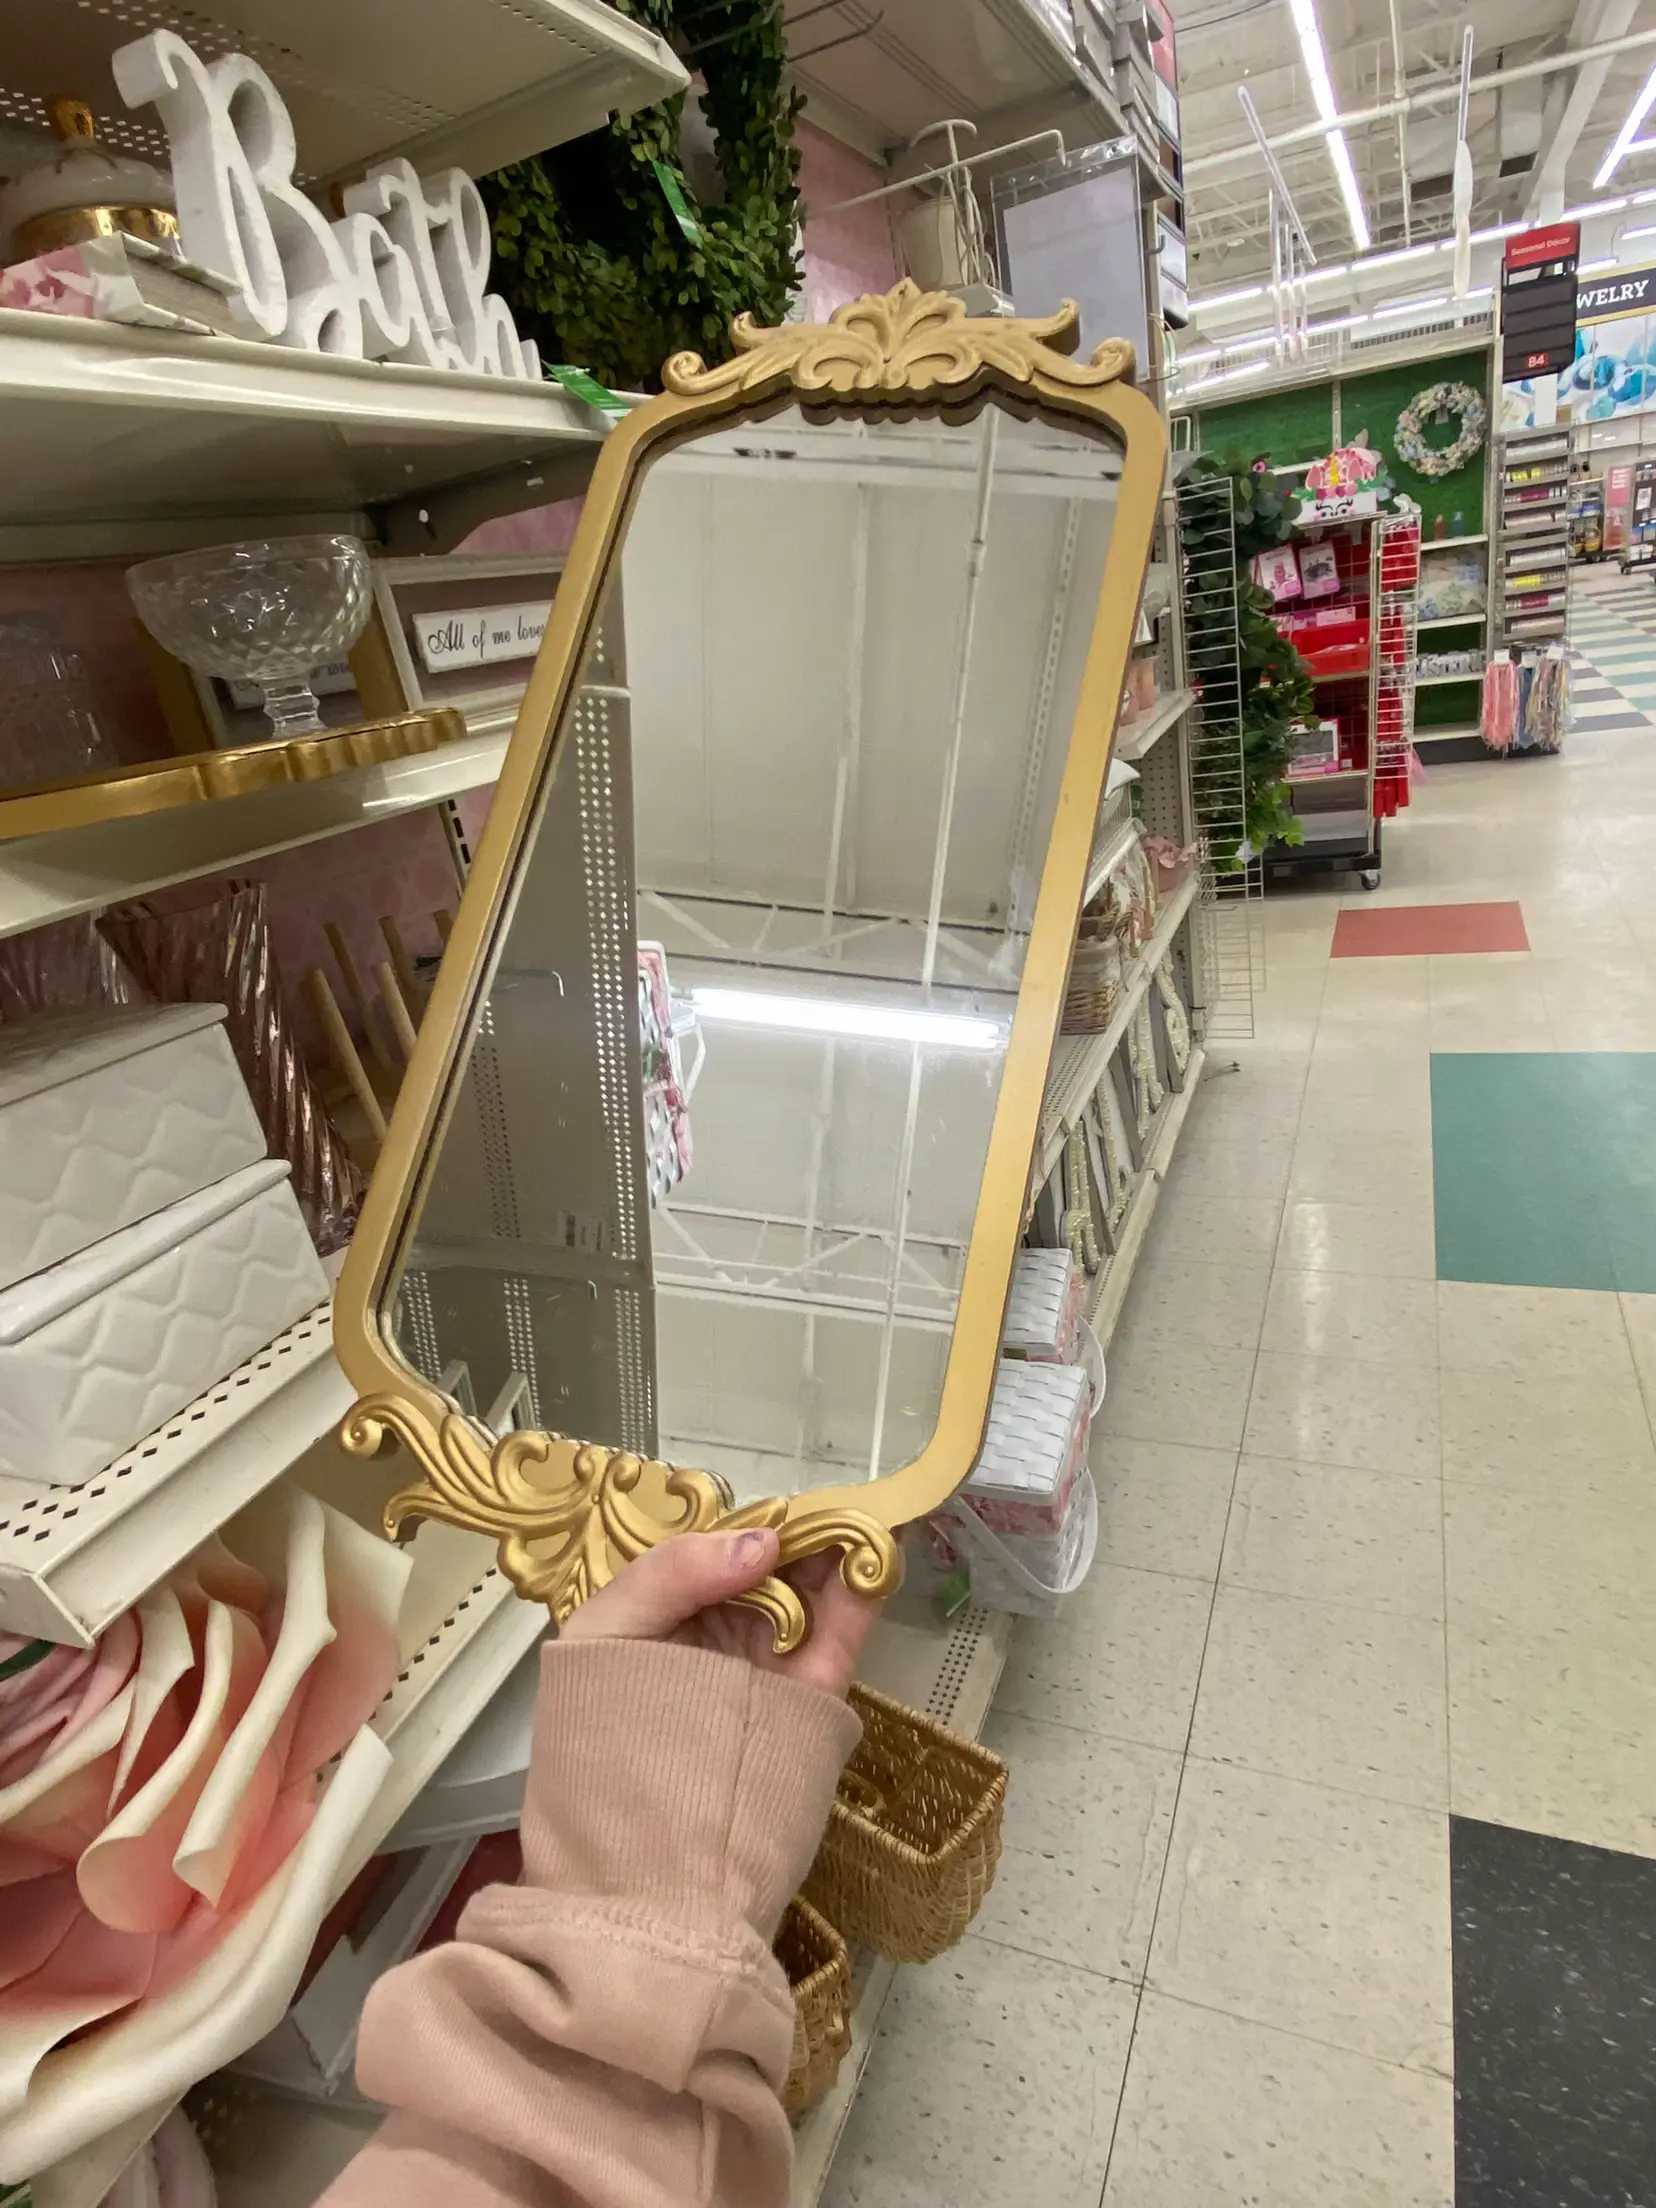  A mirror with a gold frame is being held by a person.